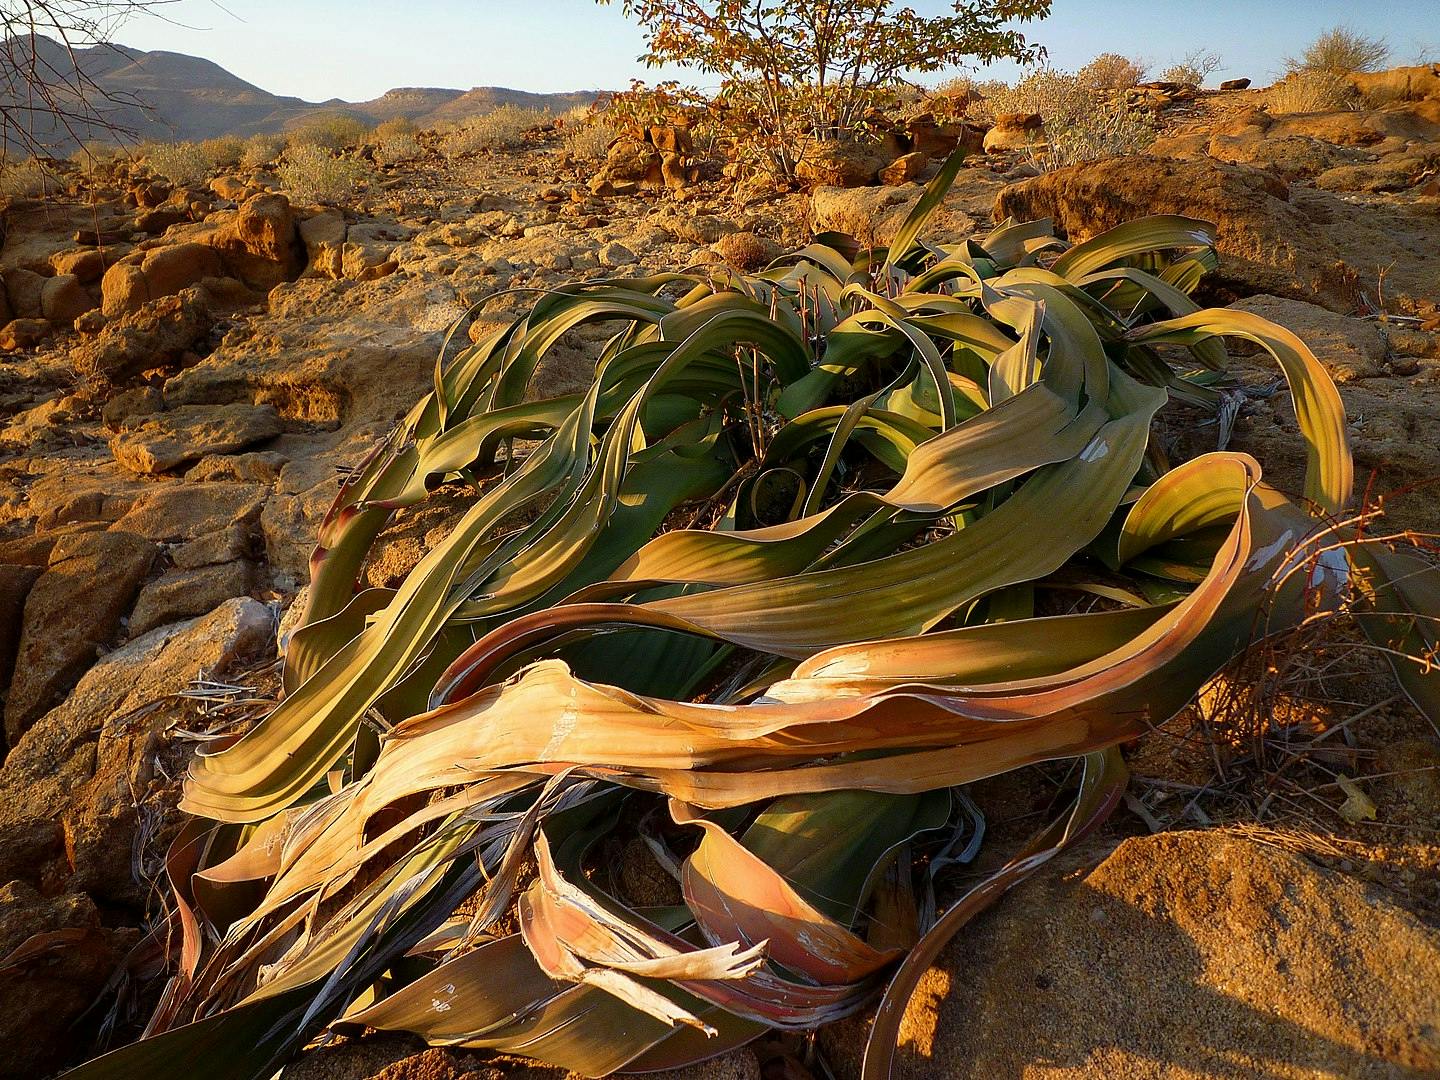 How the Welwitschia mirabilis is a miraculous "living fossil"